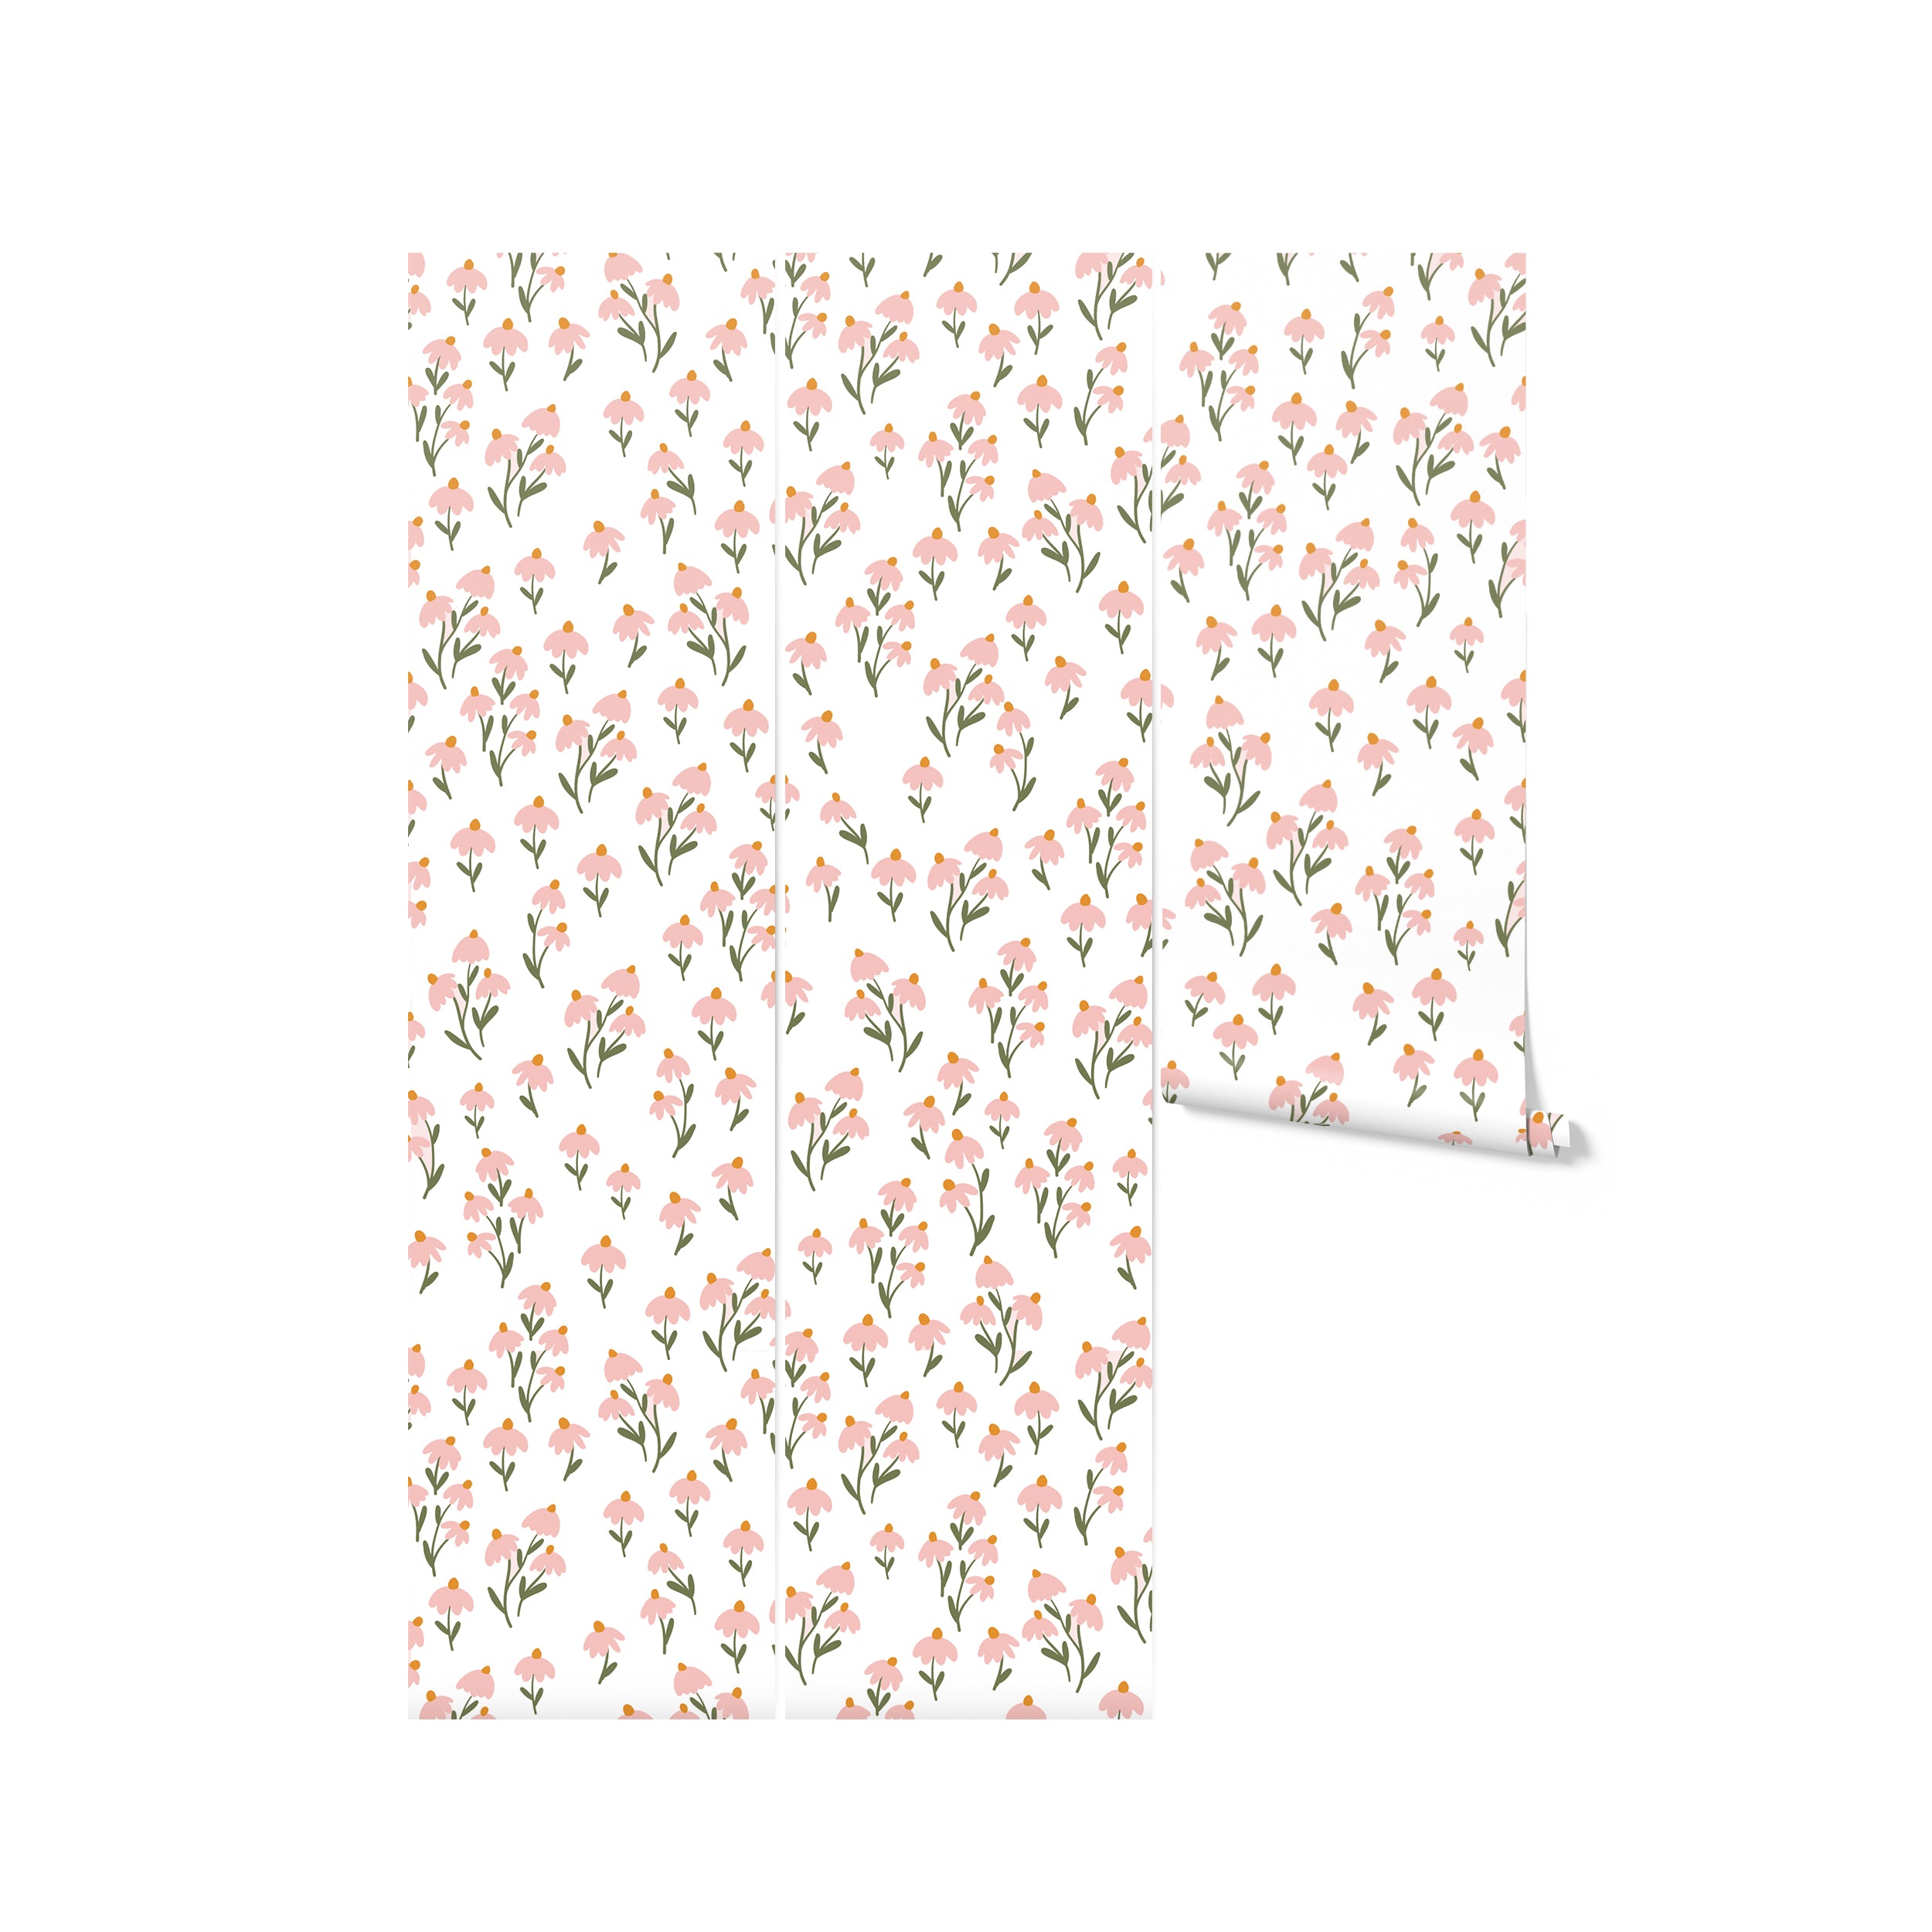 A roll of Floral Love Wallpaper- Pink, displaying the charming and delicate pink floral print that's ready to infuse any space with love and a touch of romantic whimsy.